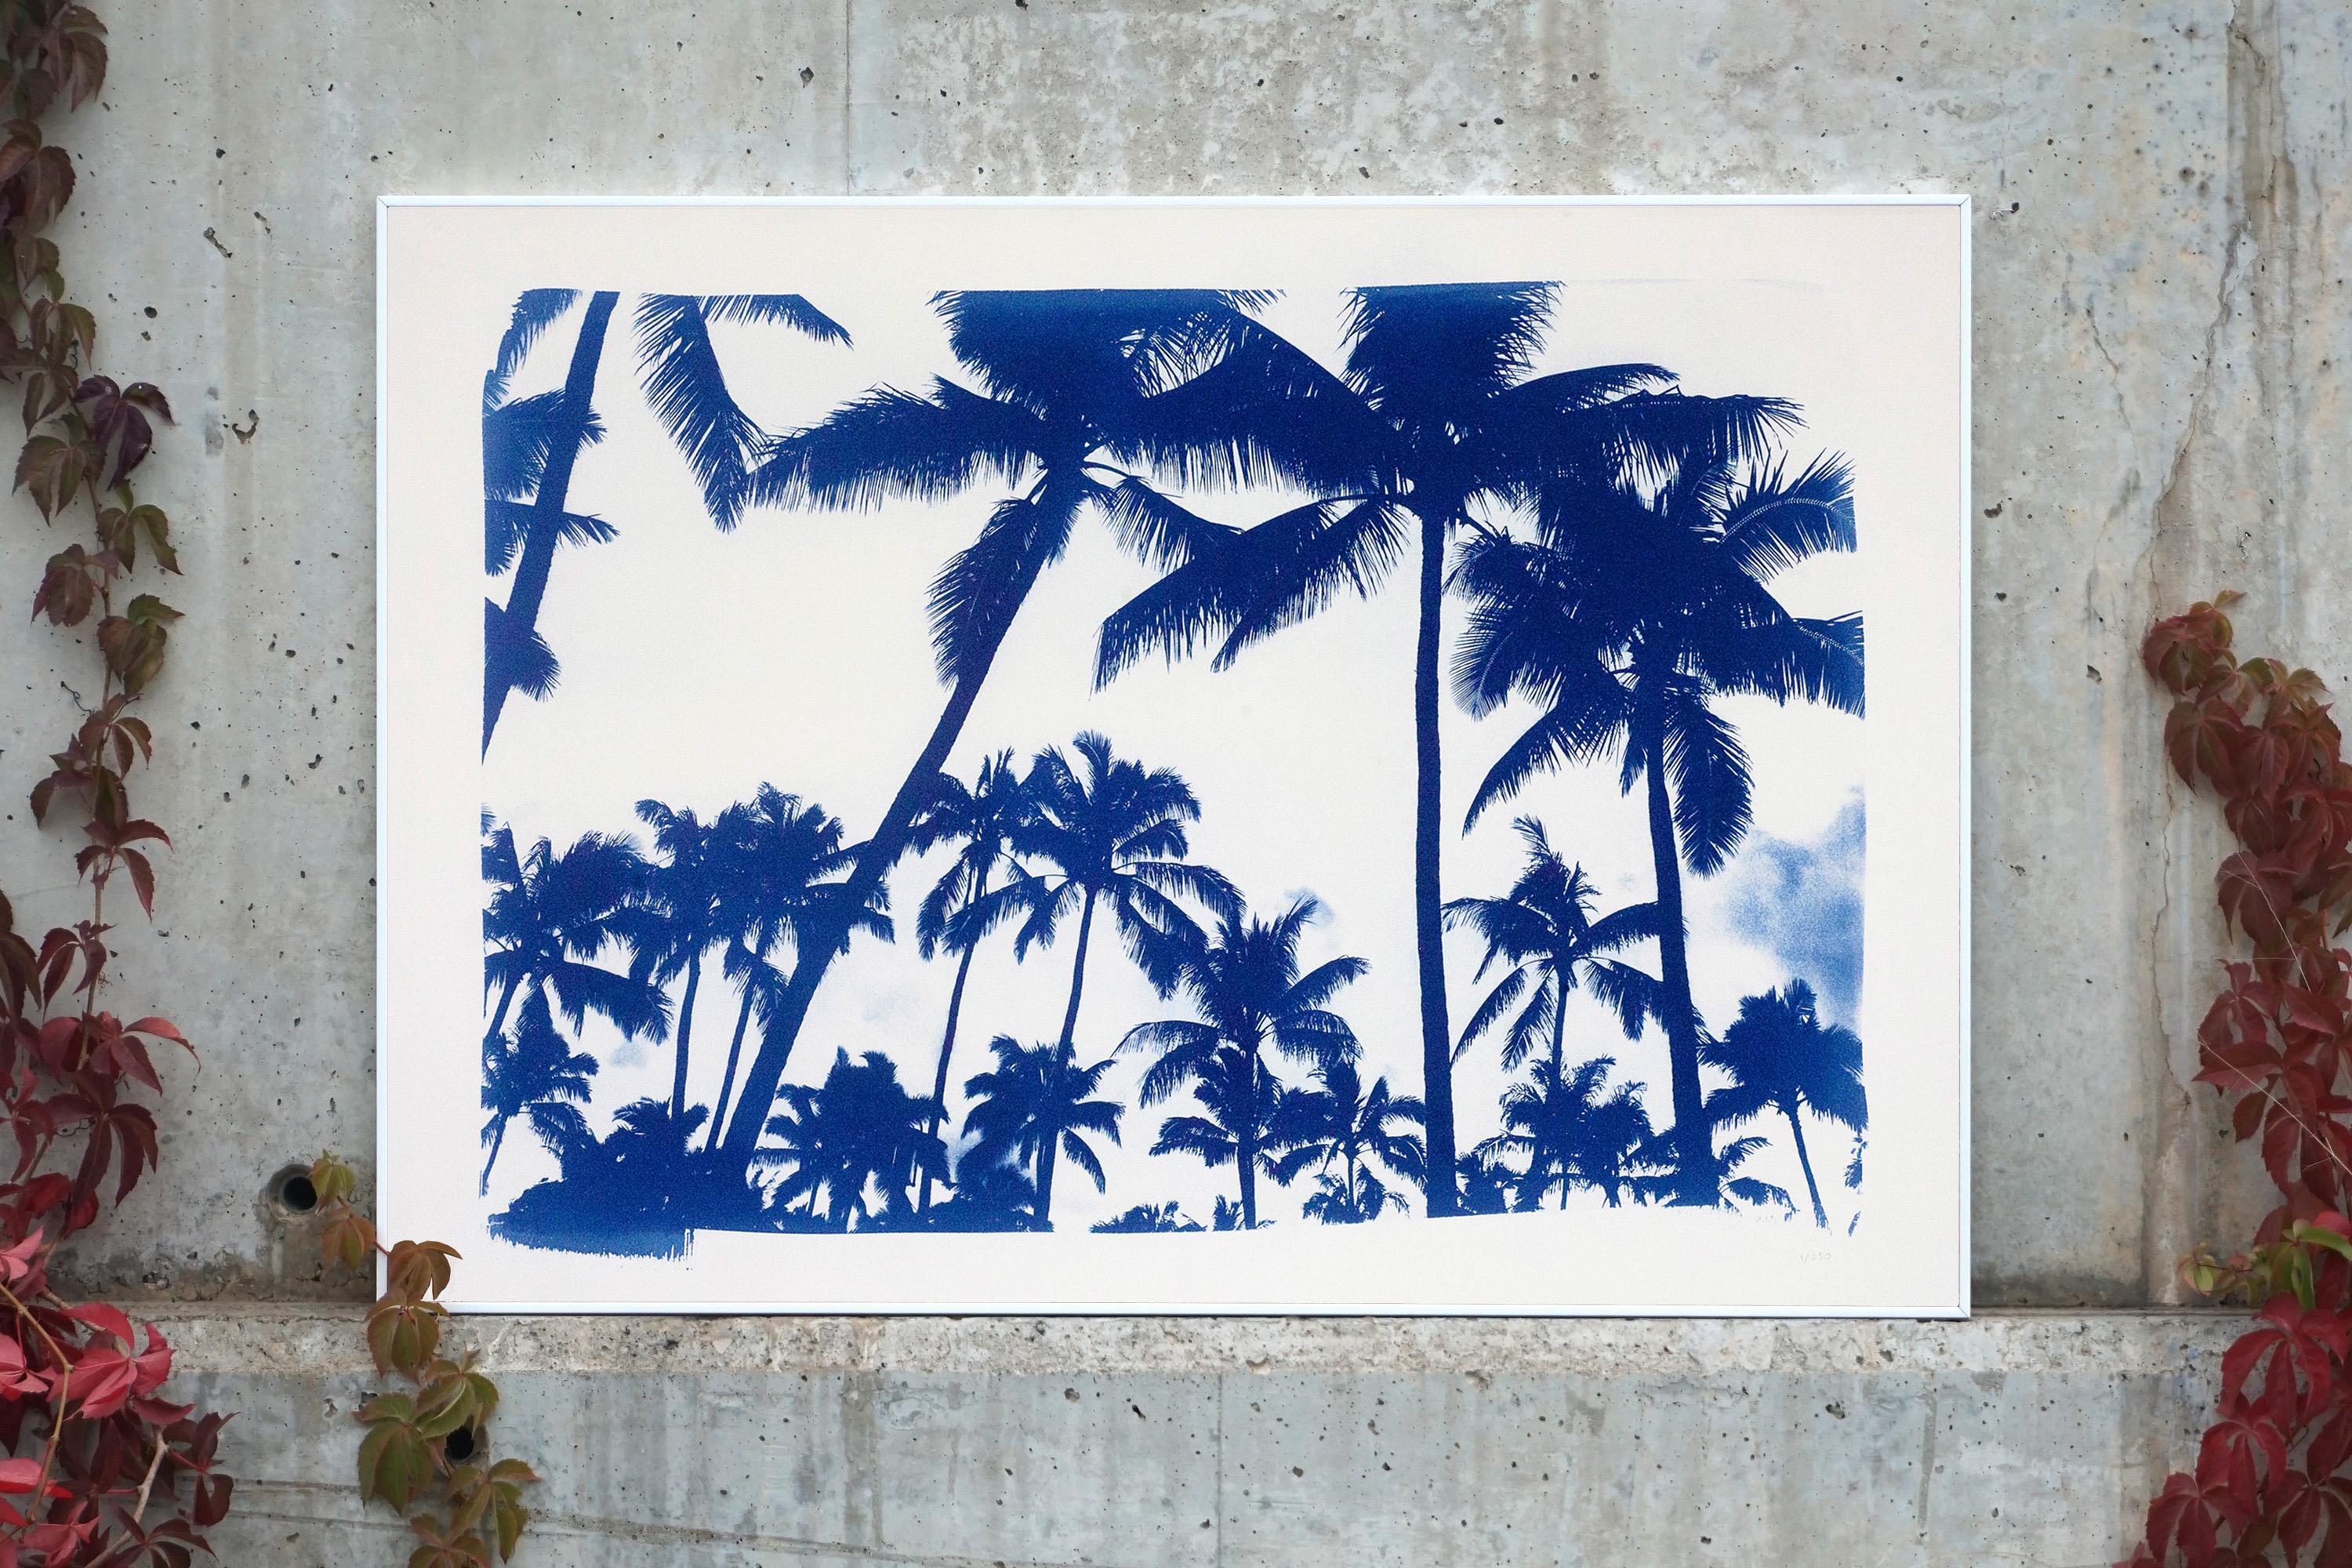 Acapulco Palm Sunset, Cyanotype on Watercolor Paper, 100x70cm, Limited Edition  - Contemporary Print by Kind of Cyan